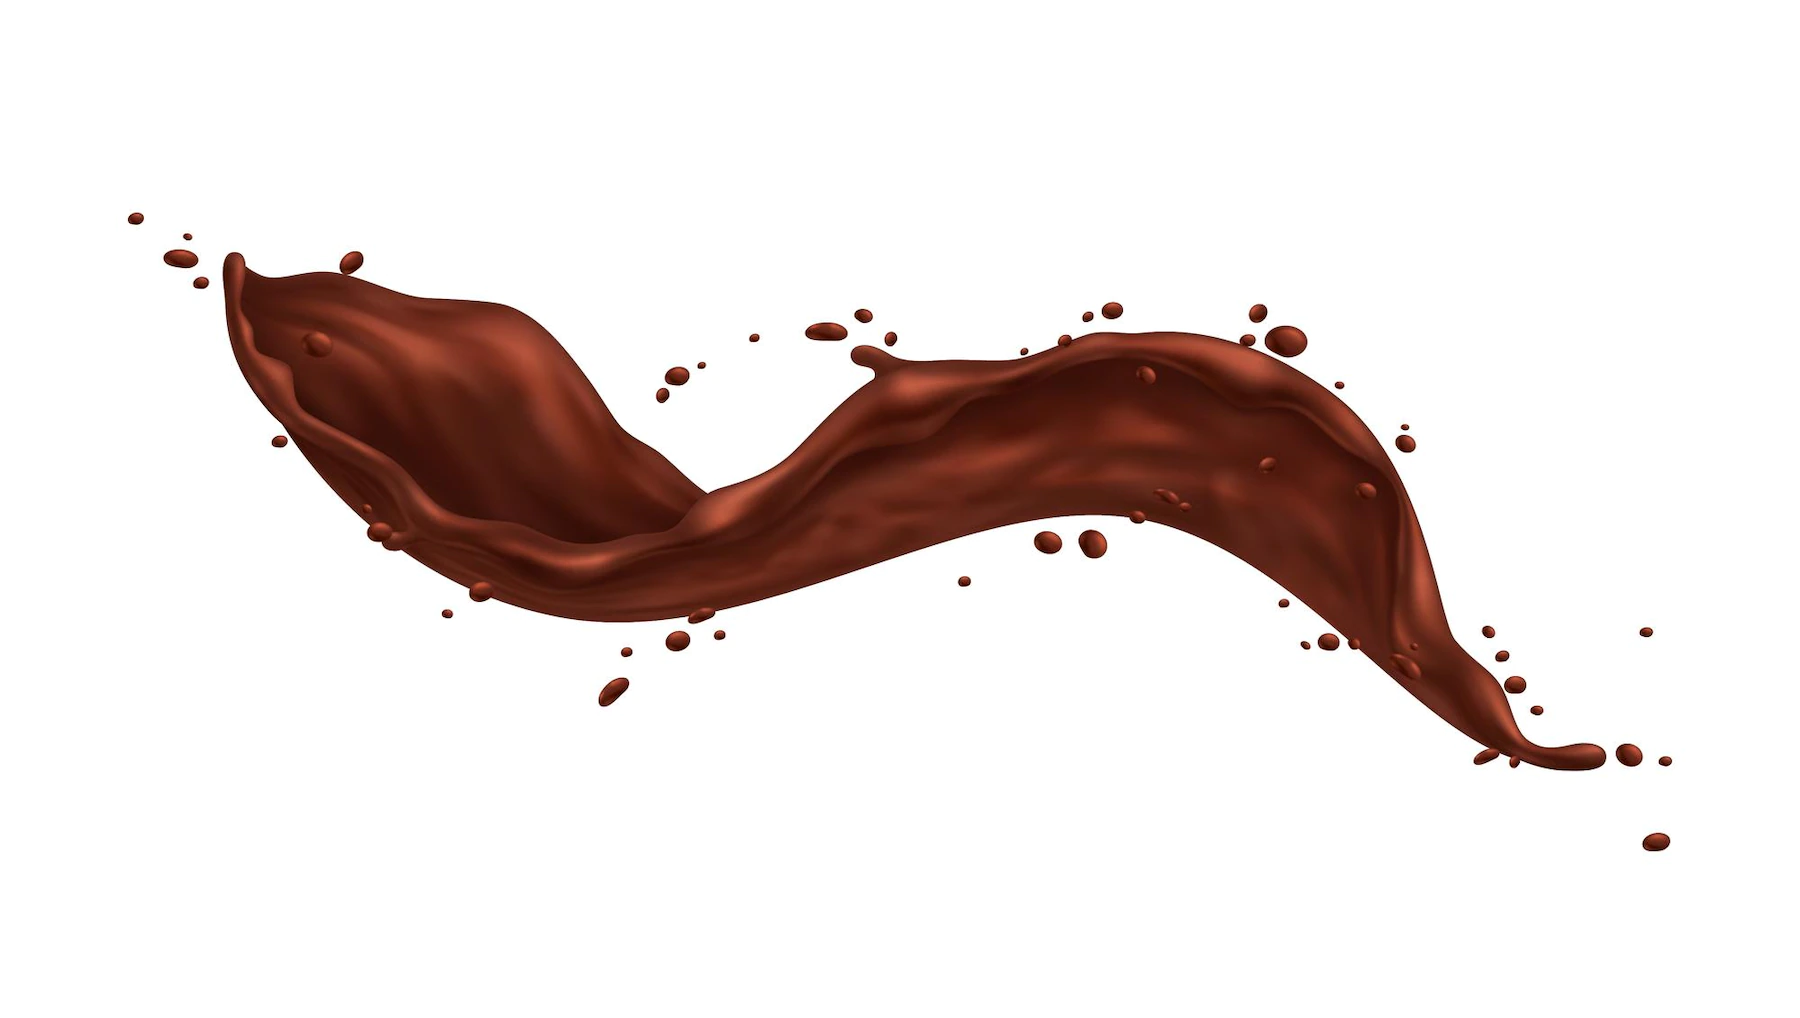 chocolate splashes realistic composition with isolated image spluttering brown liquid blank background vector illustration 1284 66129